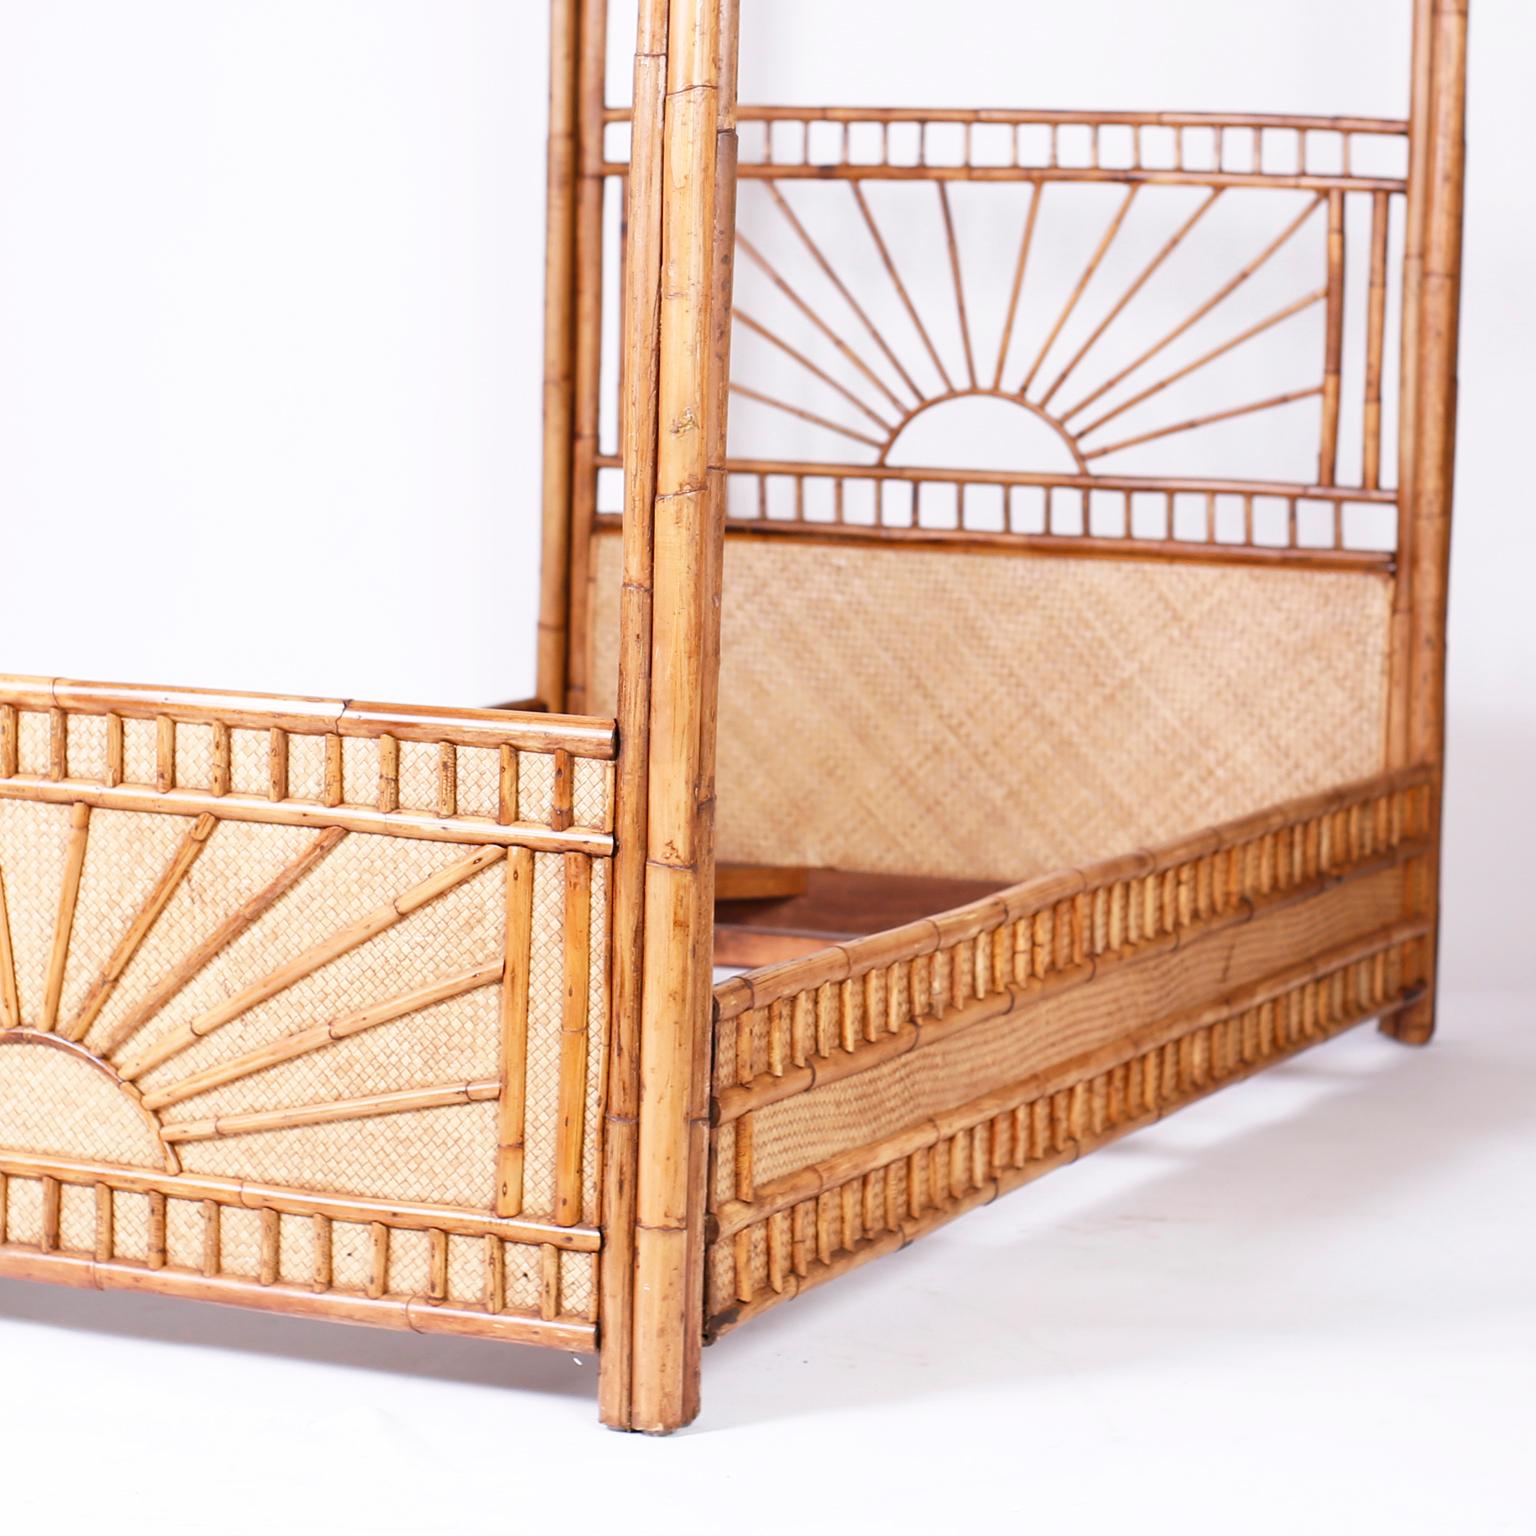 British Colonial style midcentury twin bed frame crafted in bamboo with grasscloth panels on the head and foot board, featuring rising sun motifs in the front, back and top.